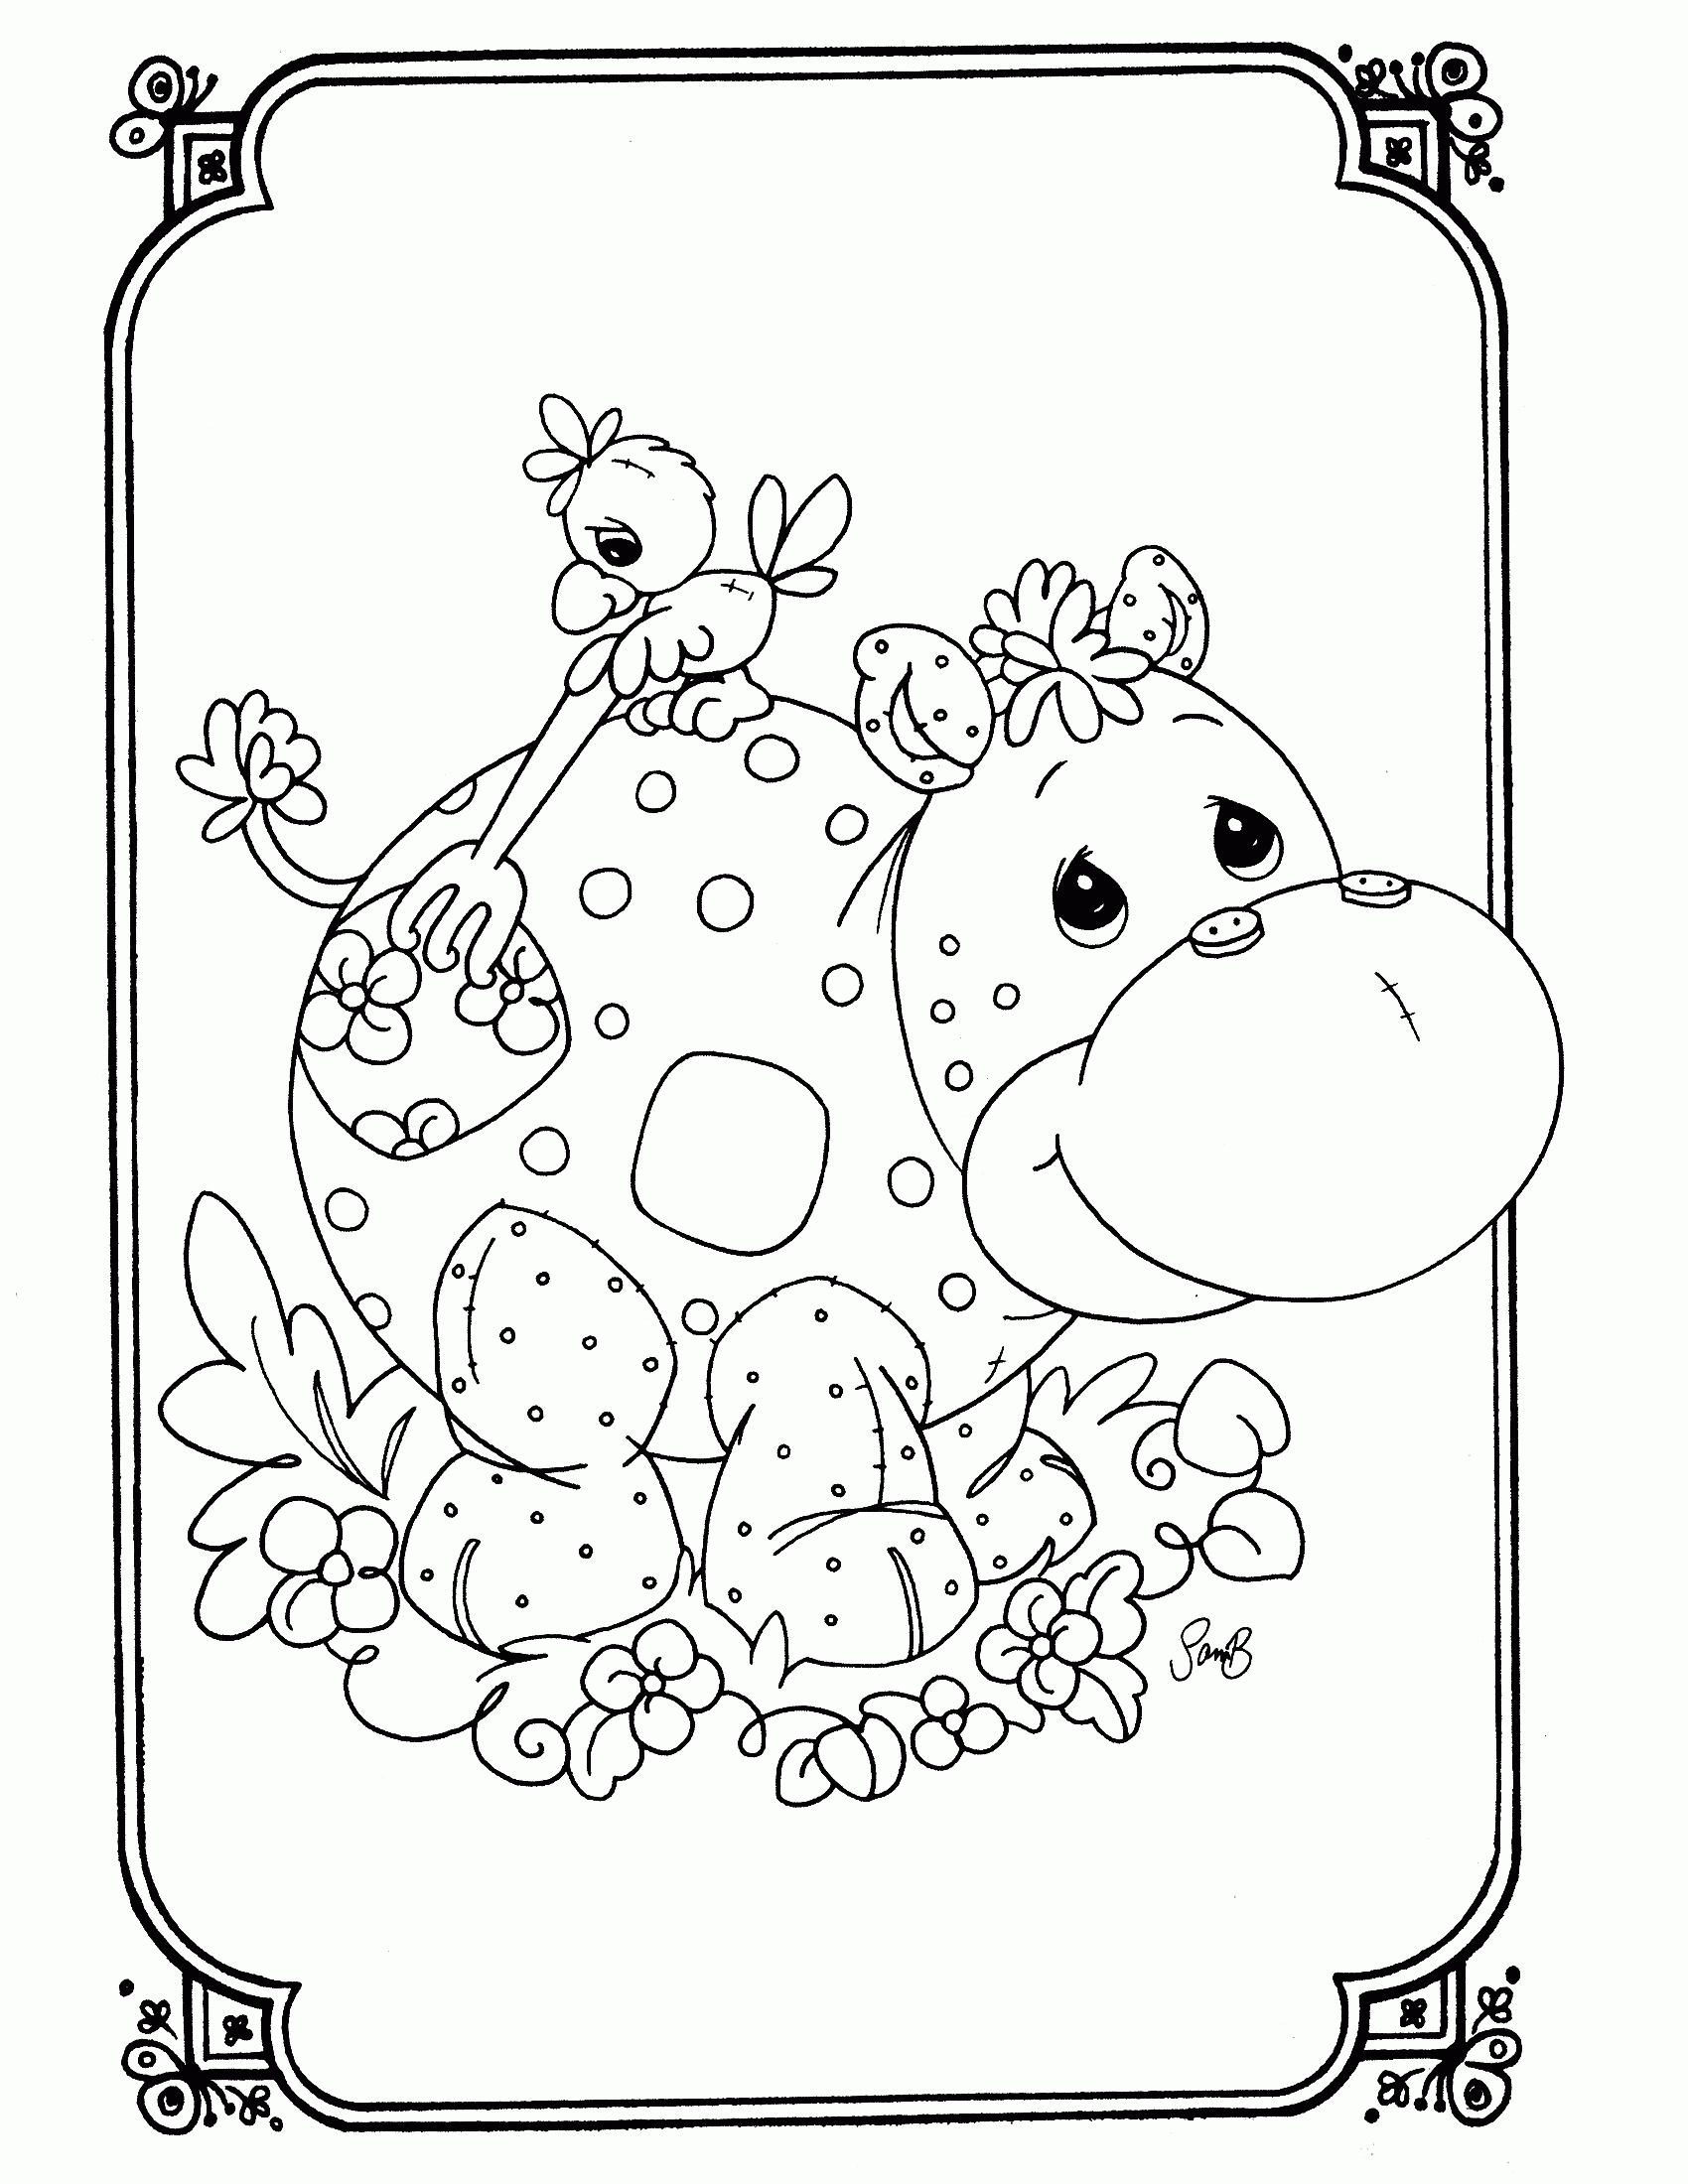 Straightforward Free Coloring Pages Of Precious Moments Animals